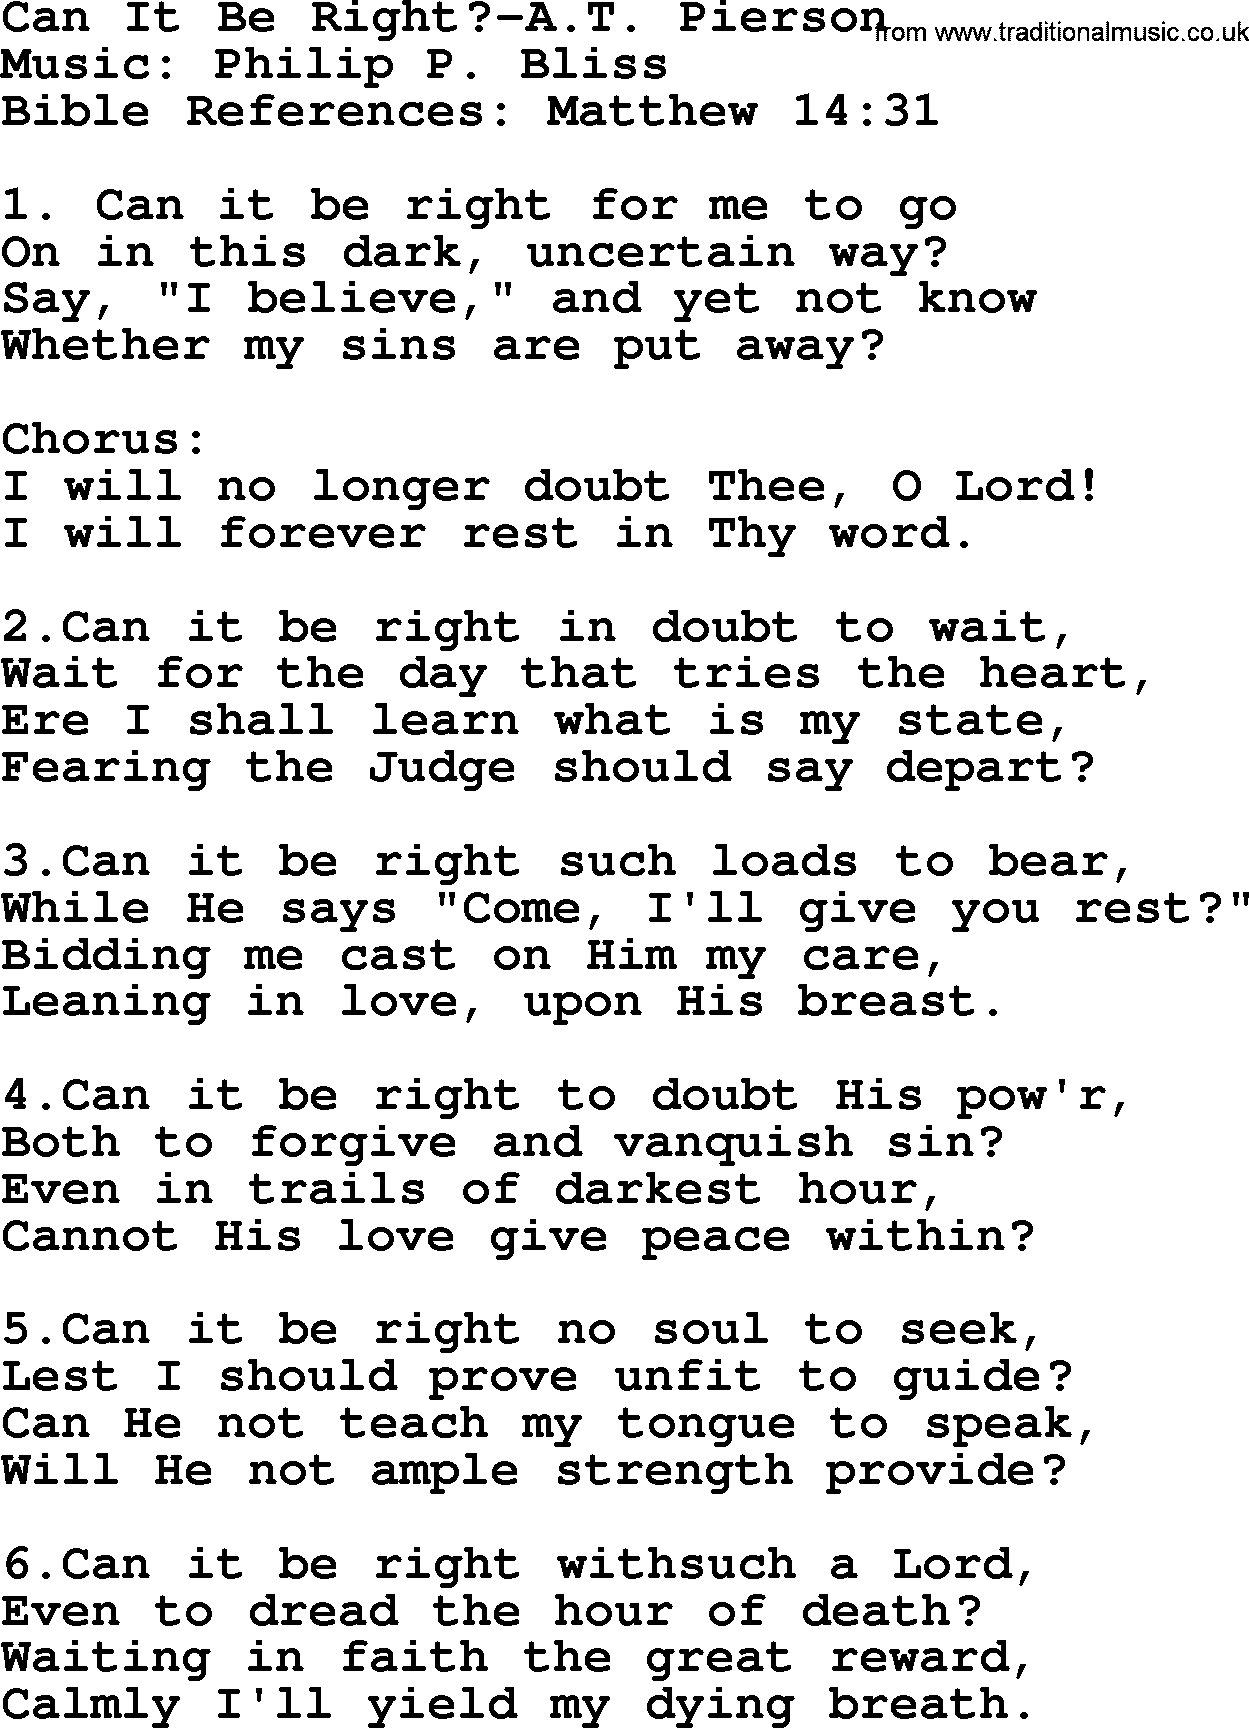 Forgiveness hymns, Hymn: Can It Be Right-A.T. Pierson, lyrics with PDF